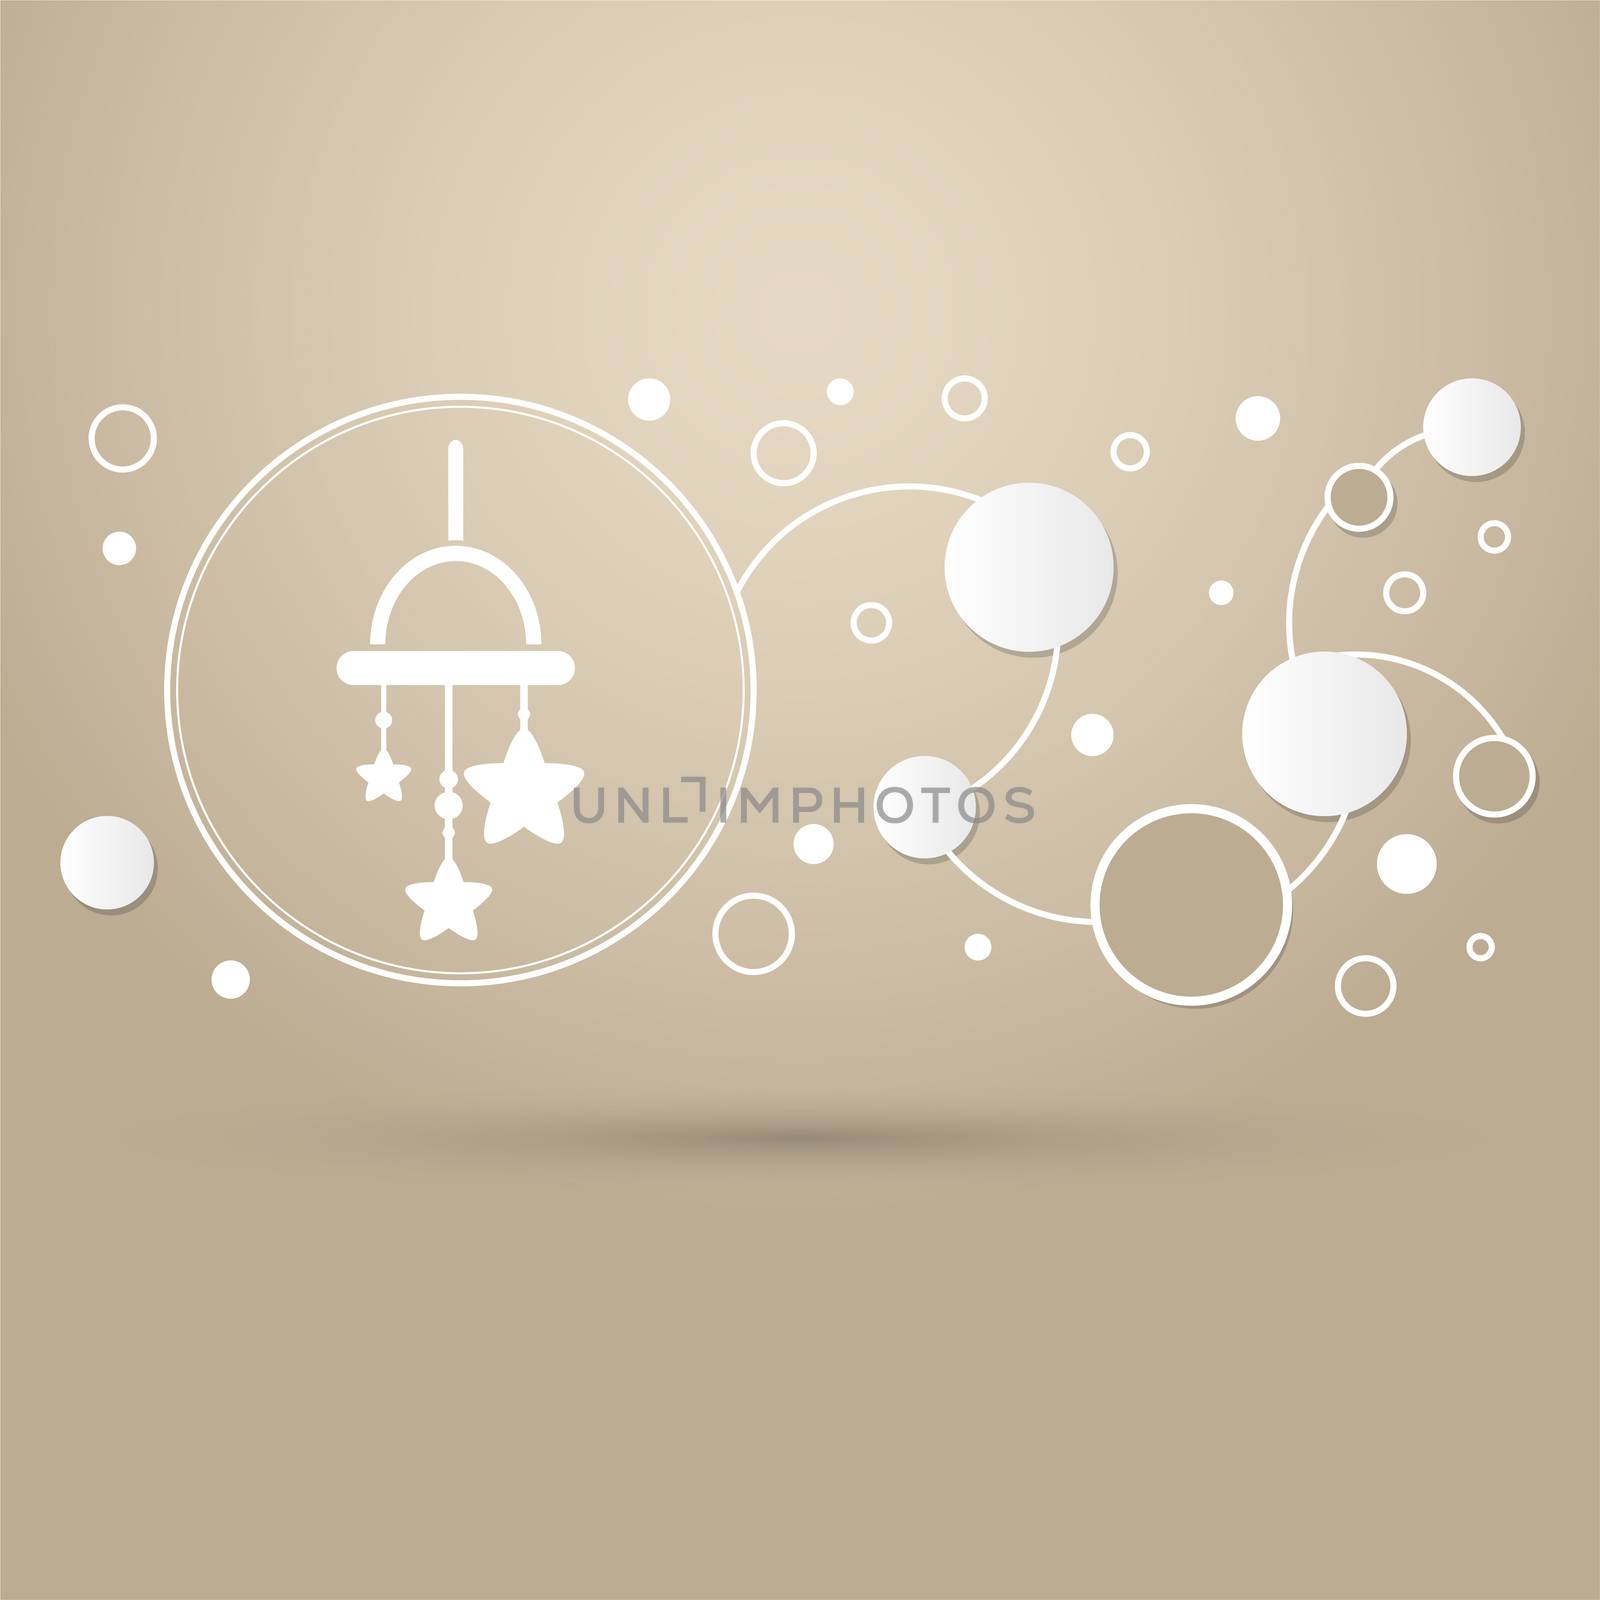 Baby crib hanging toy icon on a brown background with elegant style and modern design infographic. illustration